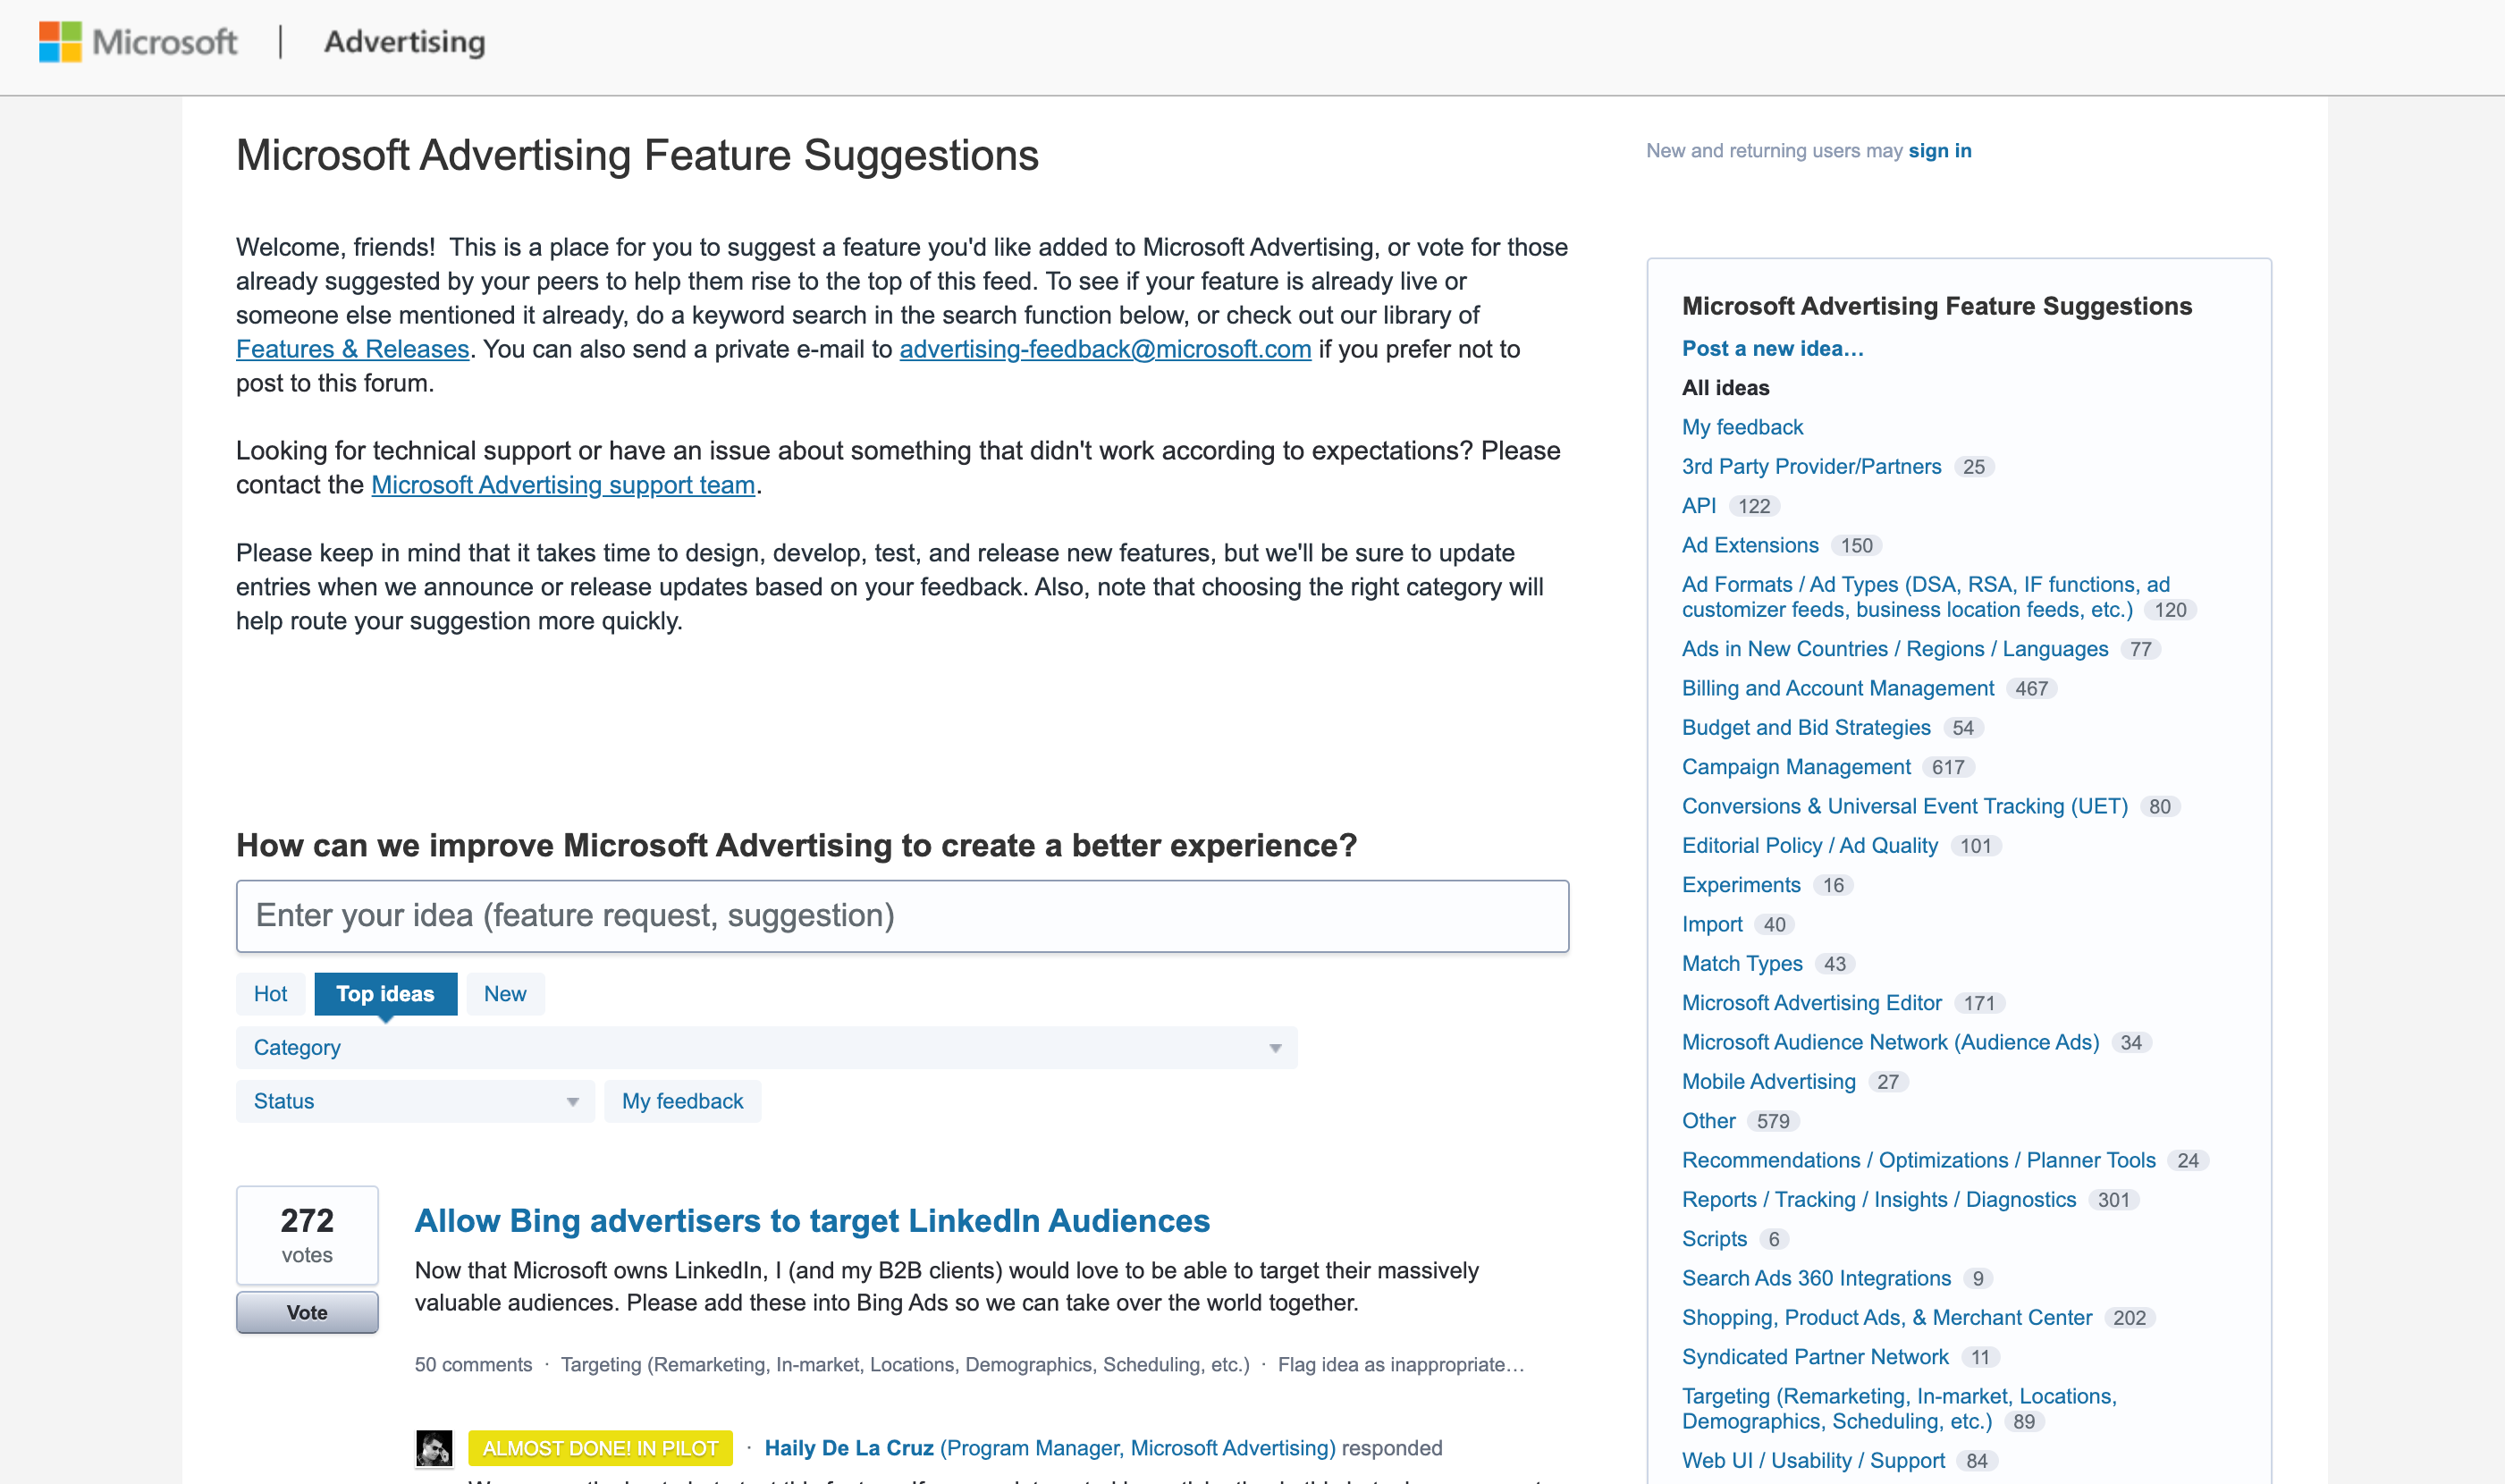 Microsoft-Advertising-Feature-Suggestions-Top-3744-ideas-–-Microsoft-Advertising-Feature-Suggestions